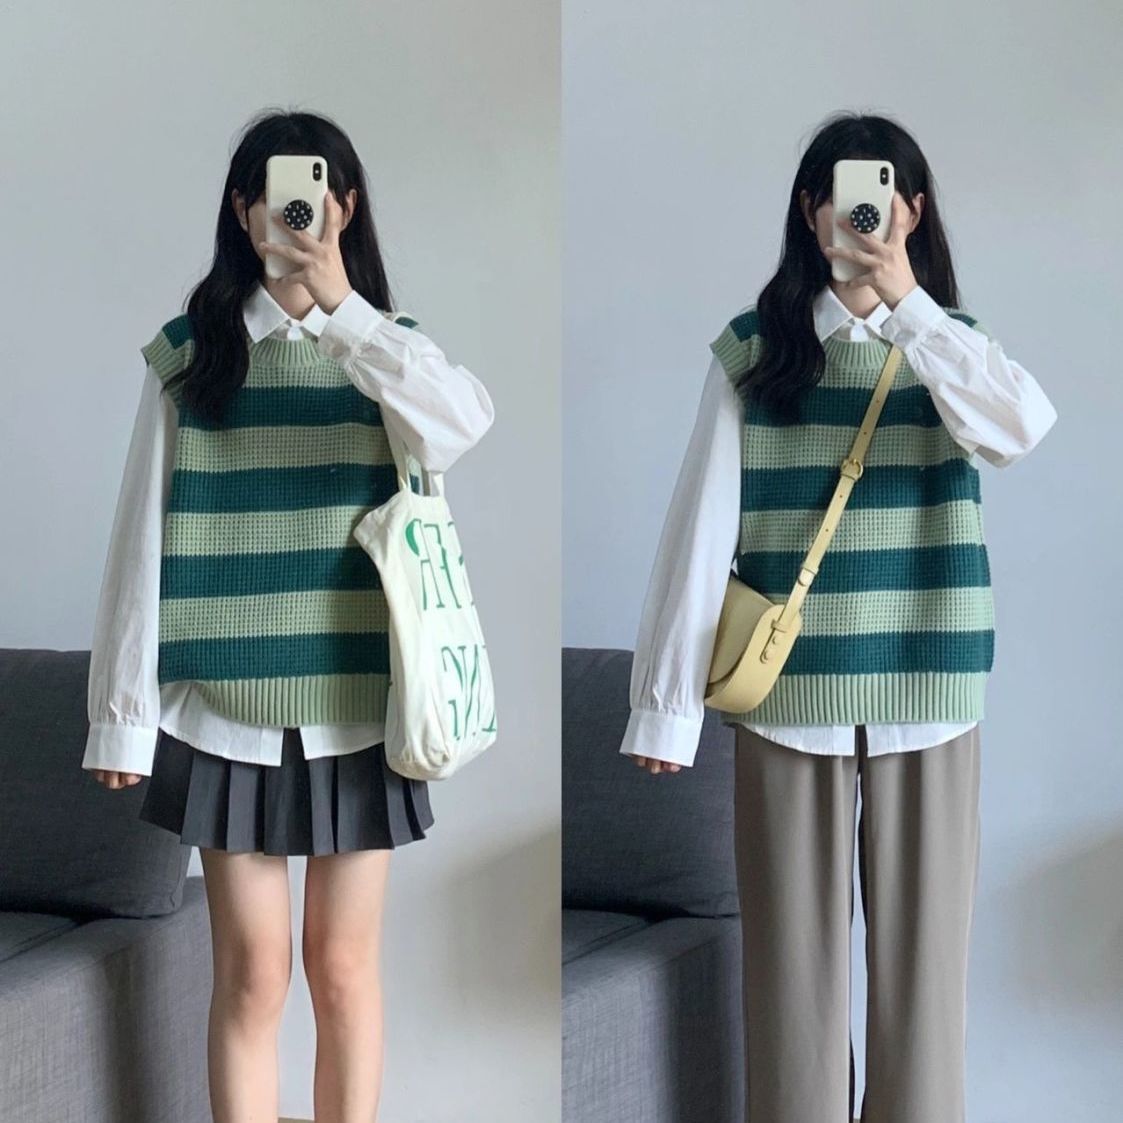 Two-piece suit autumn forest department college style waistcoat round neck knitted sweater layered vest vest with shirt women